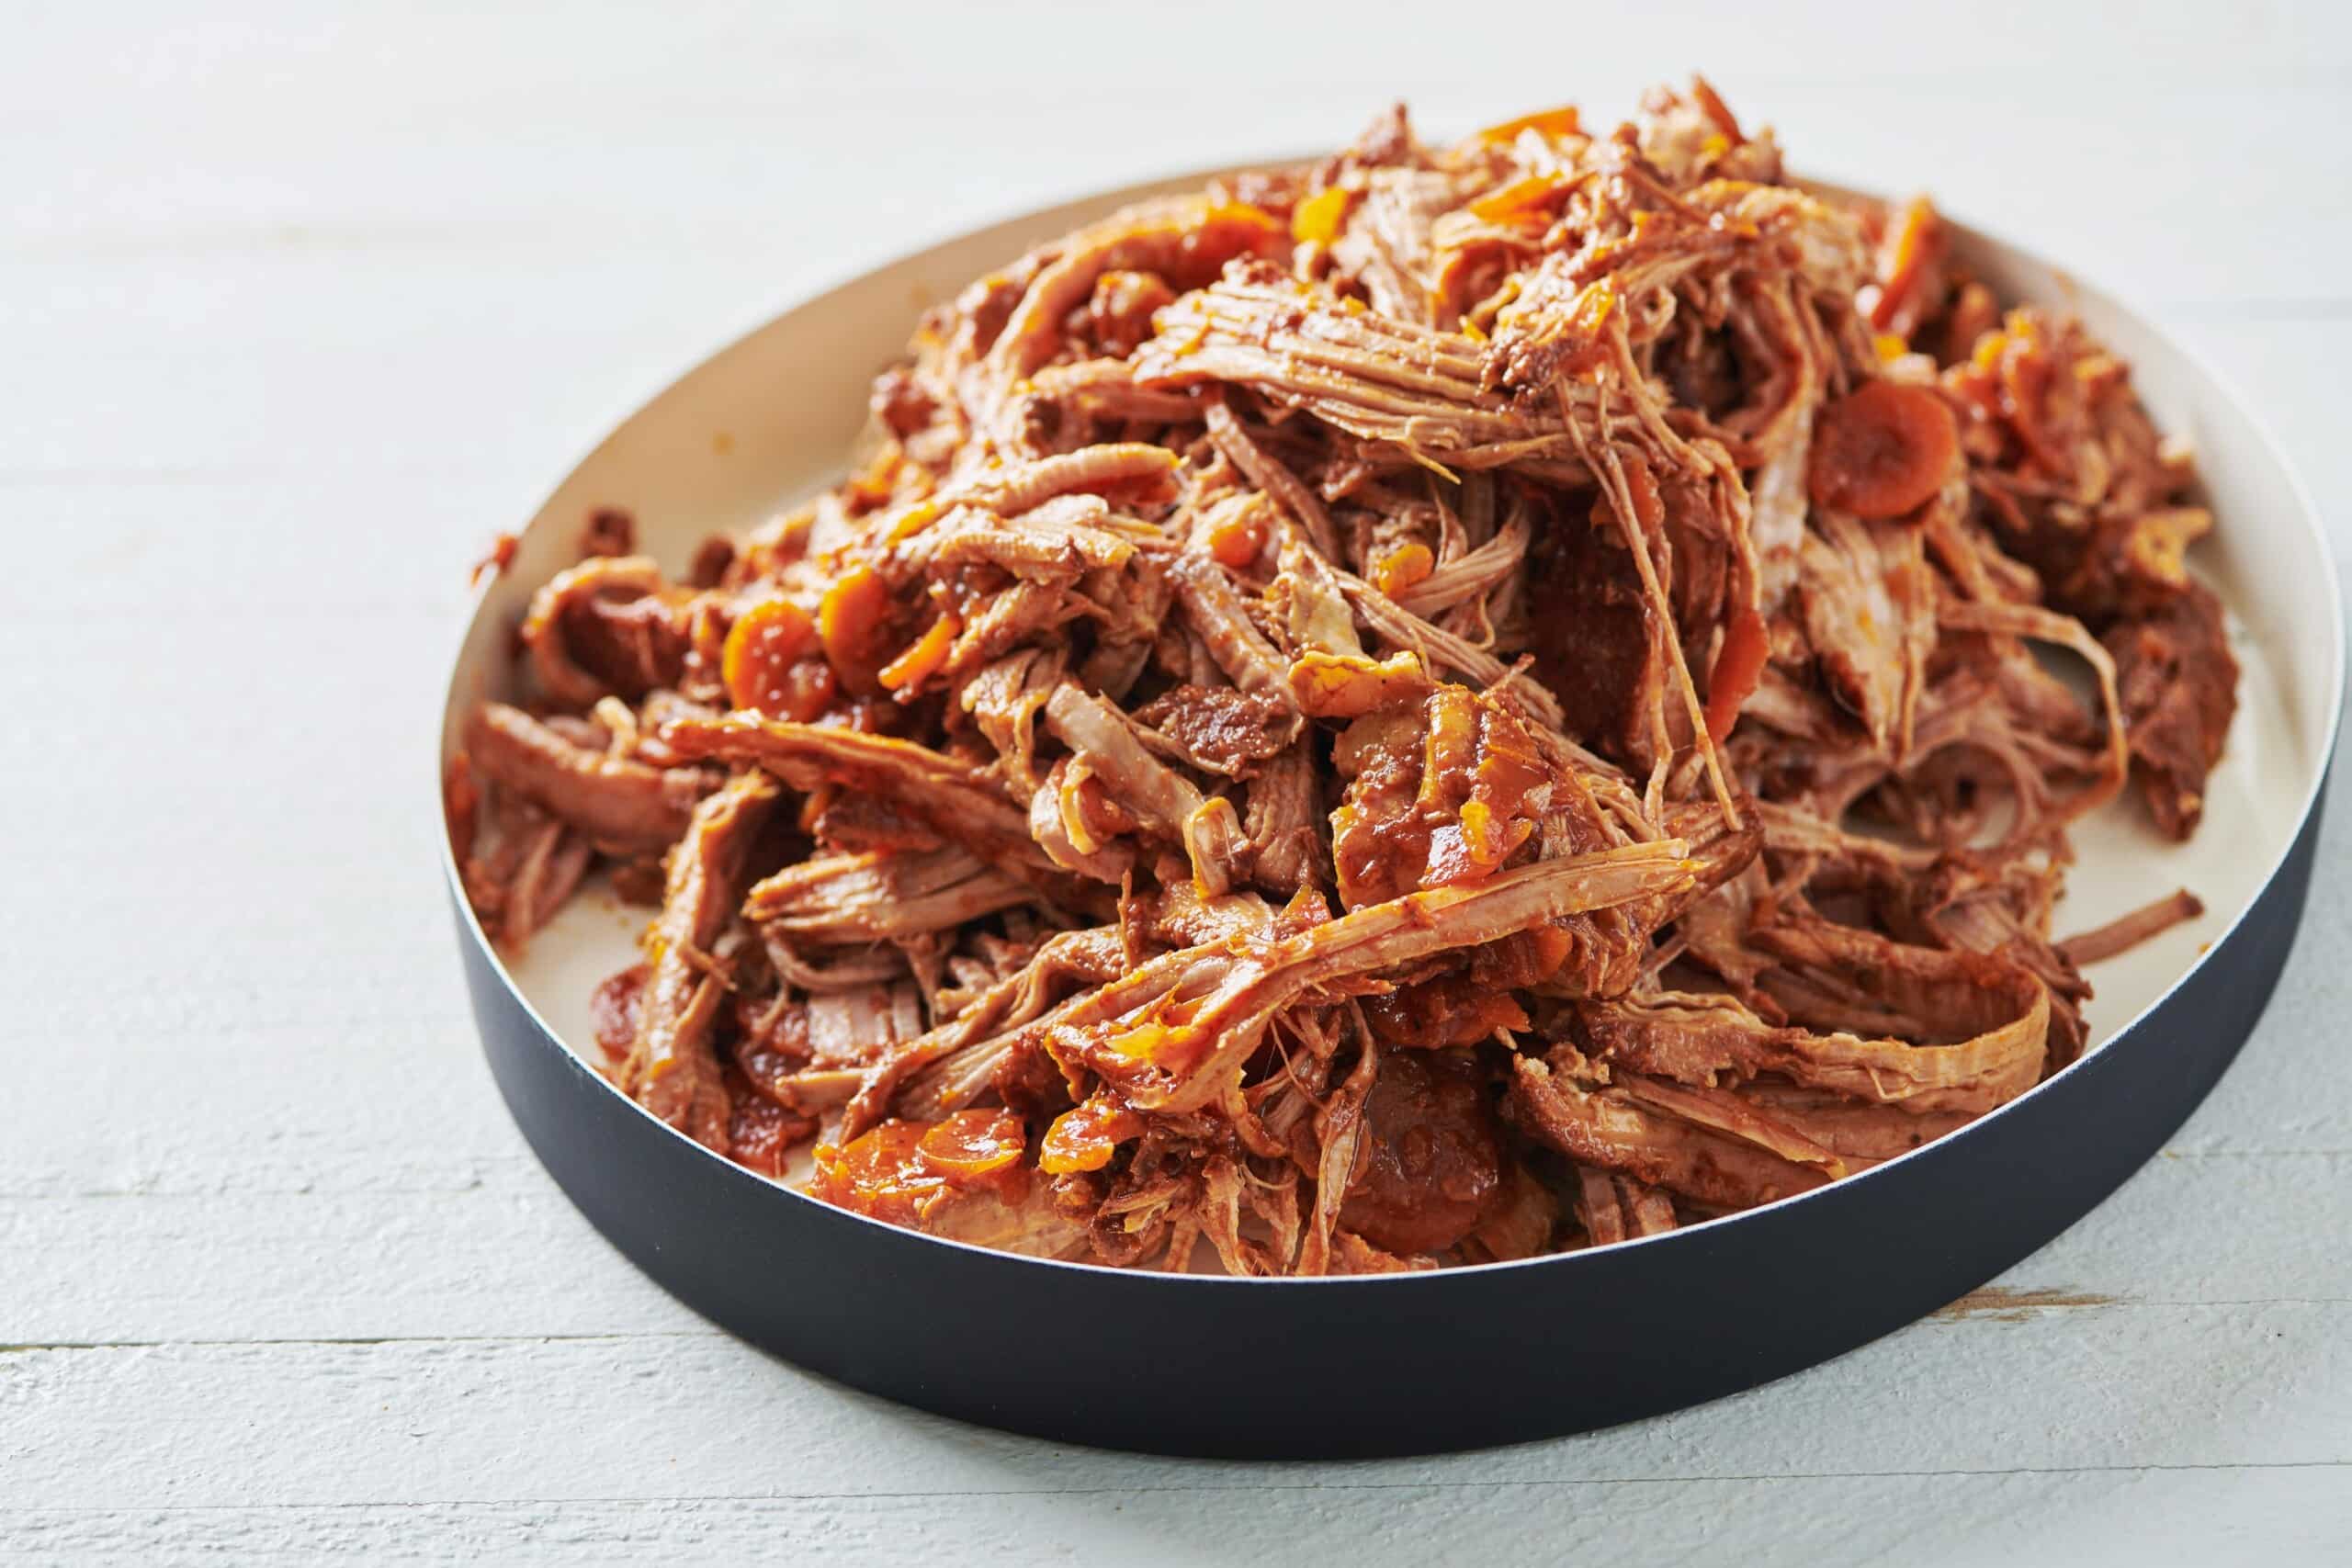 12-nutrition-facts-about-pulled-pork